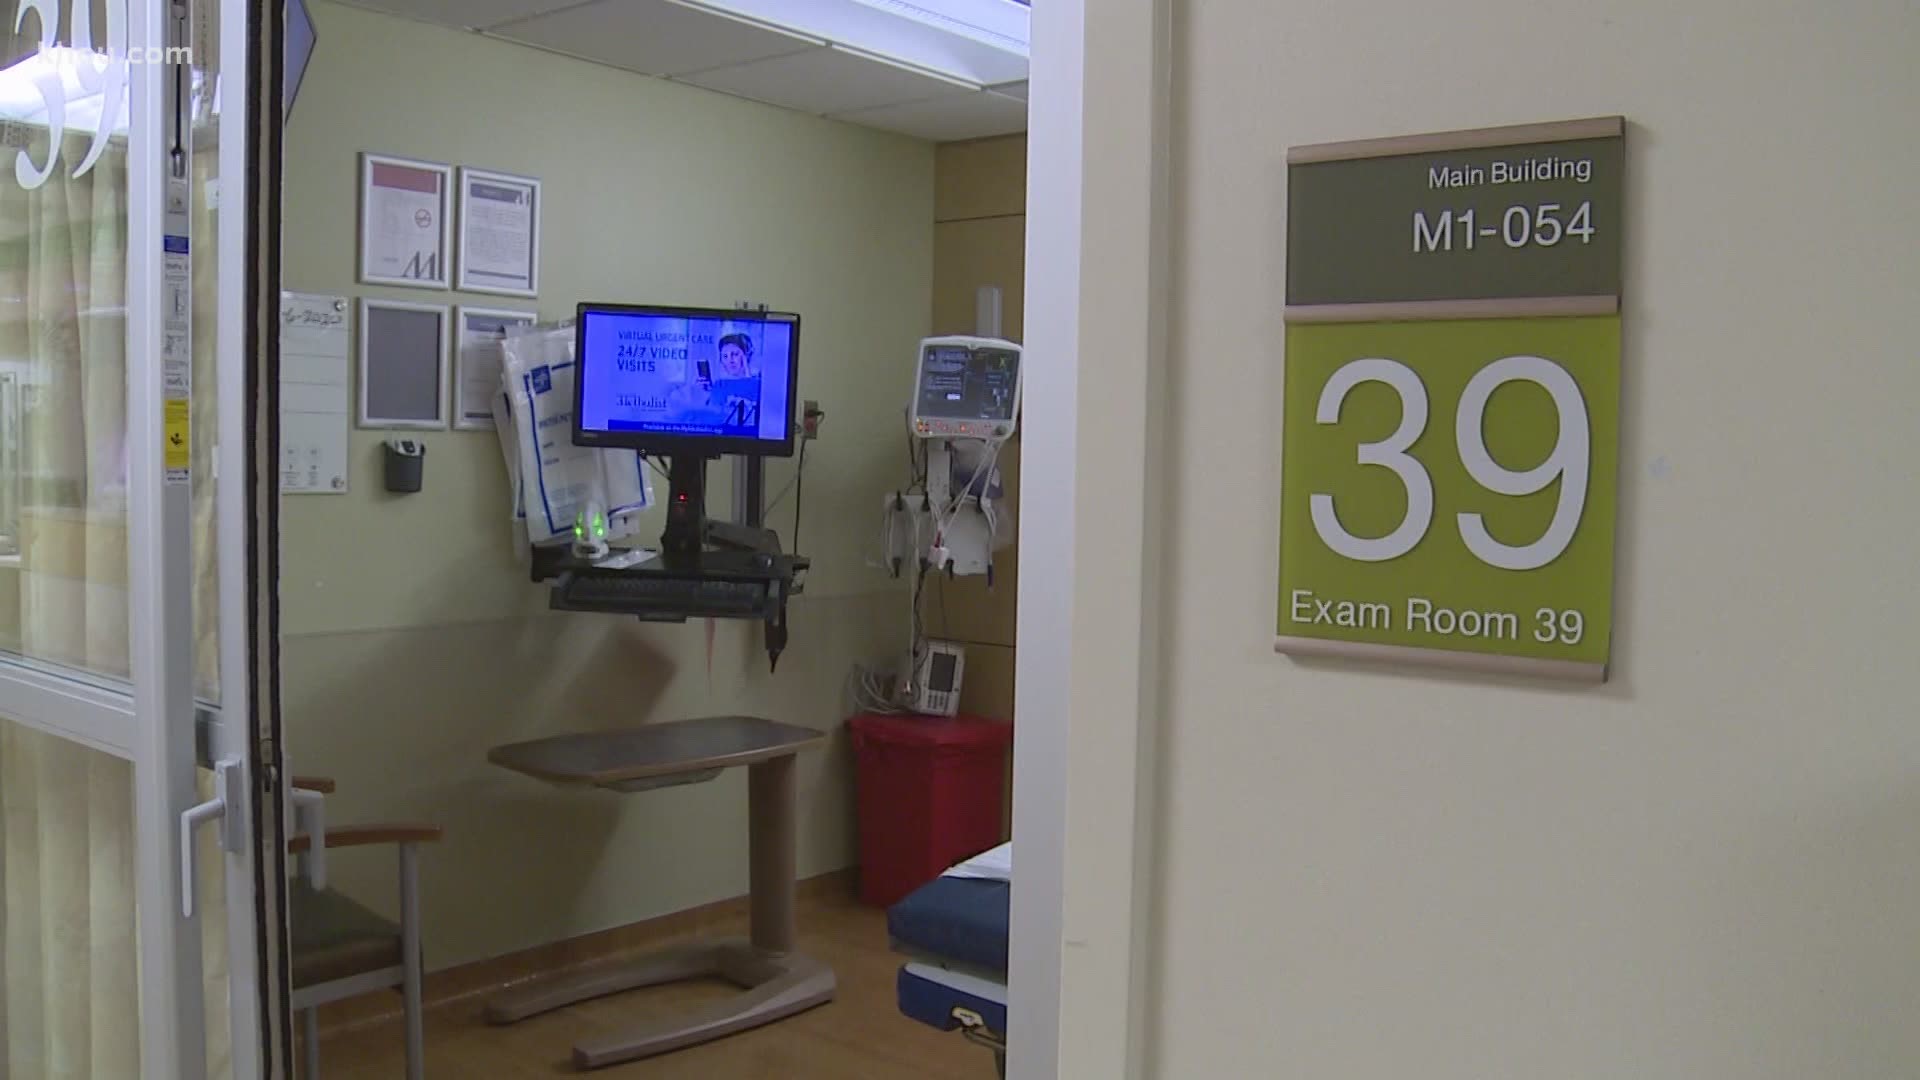 The head of Houston Methodist Hospital shared some promising news Thursday. Dr. Marc Boom says the number of patients is down 25% from the peak 10 days ago.